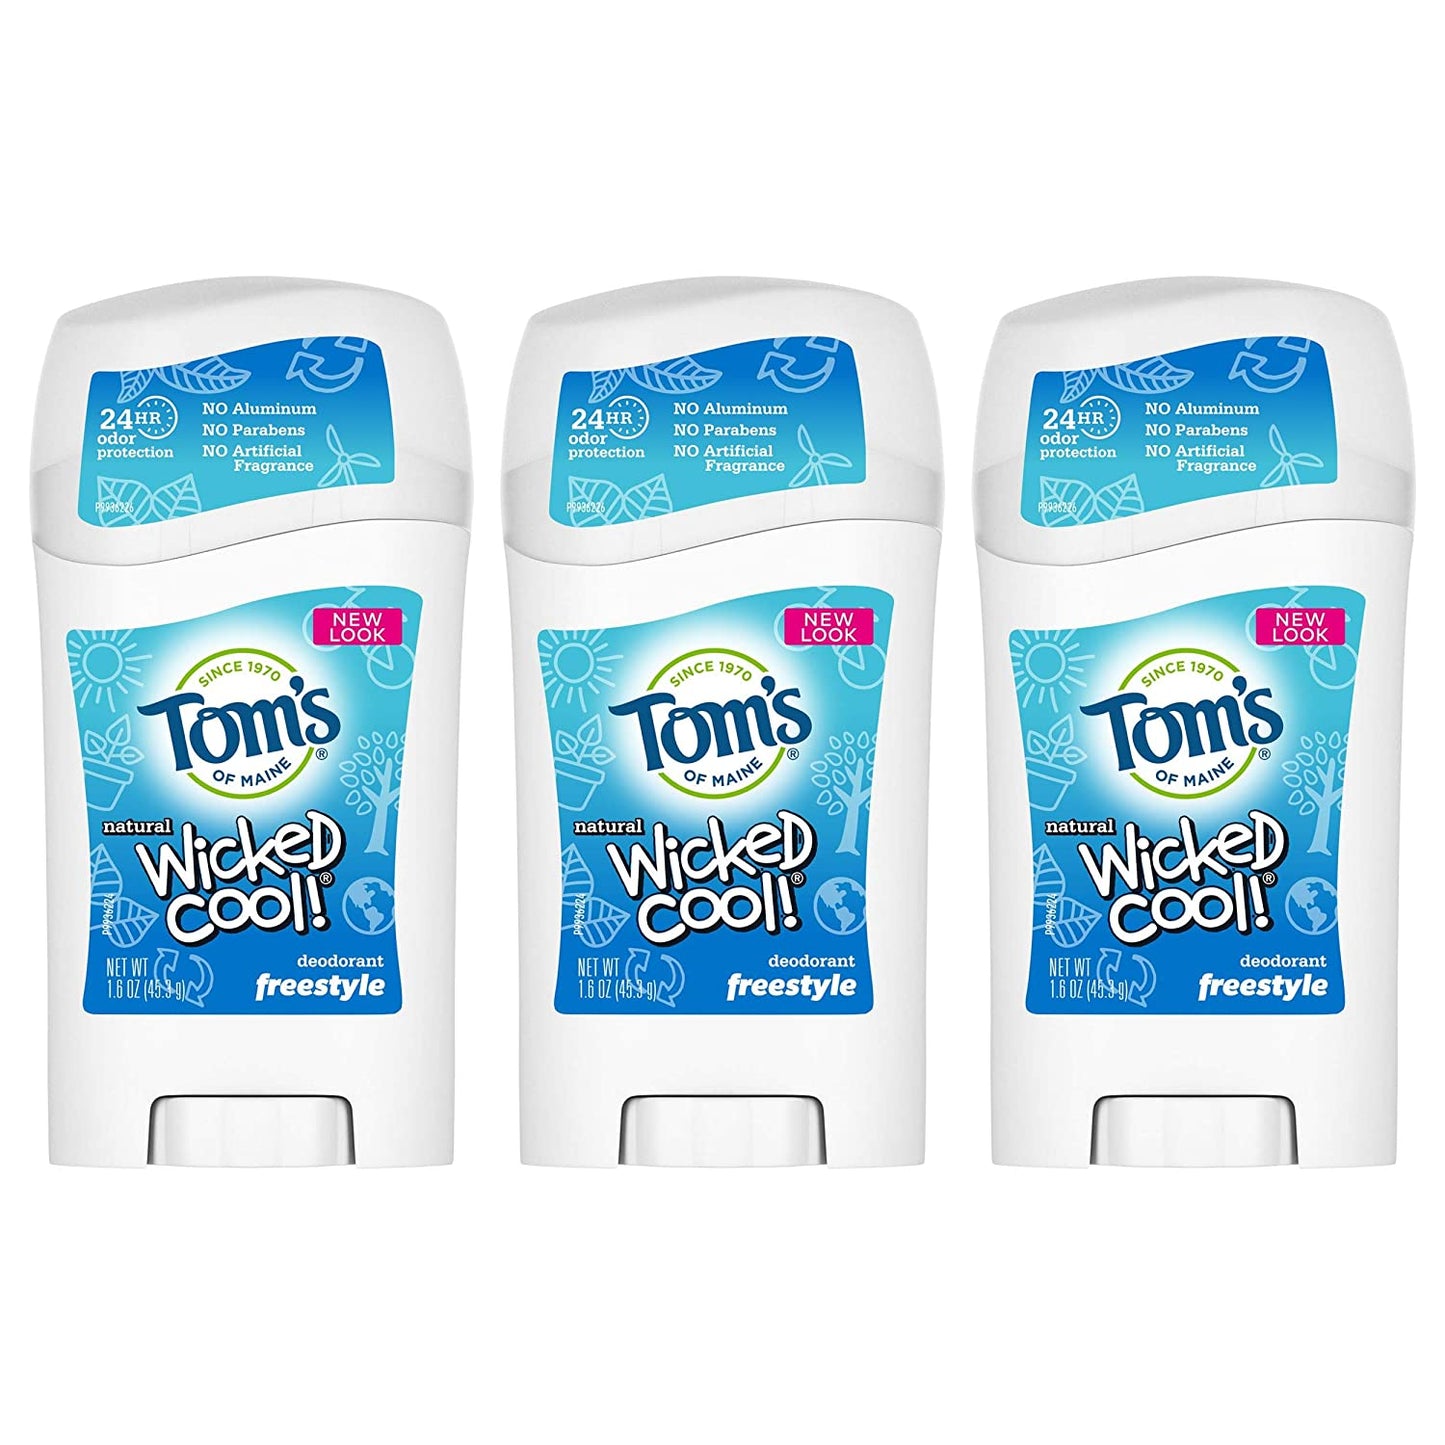 Tom's of Maine Aluminum-Free Wicked Cool! Natural Deodorant for Kids, Freestyle, 45.3 g